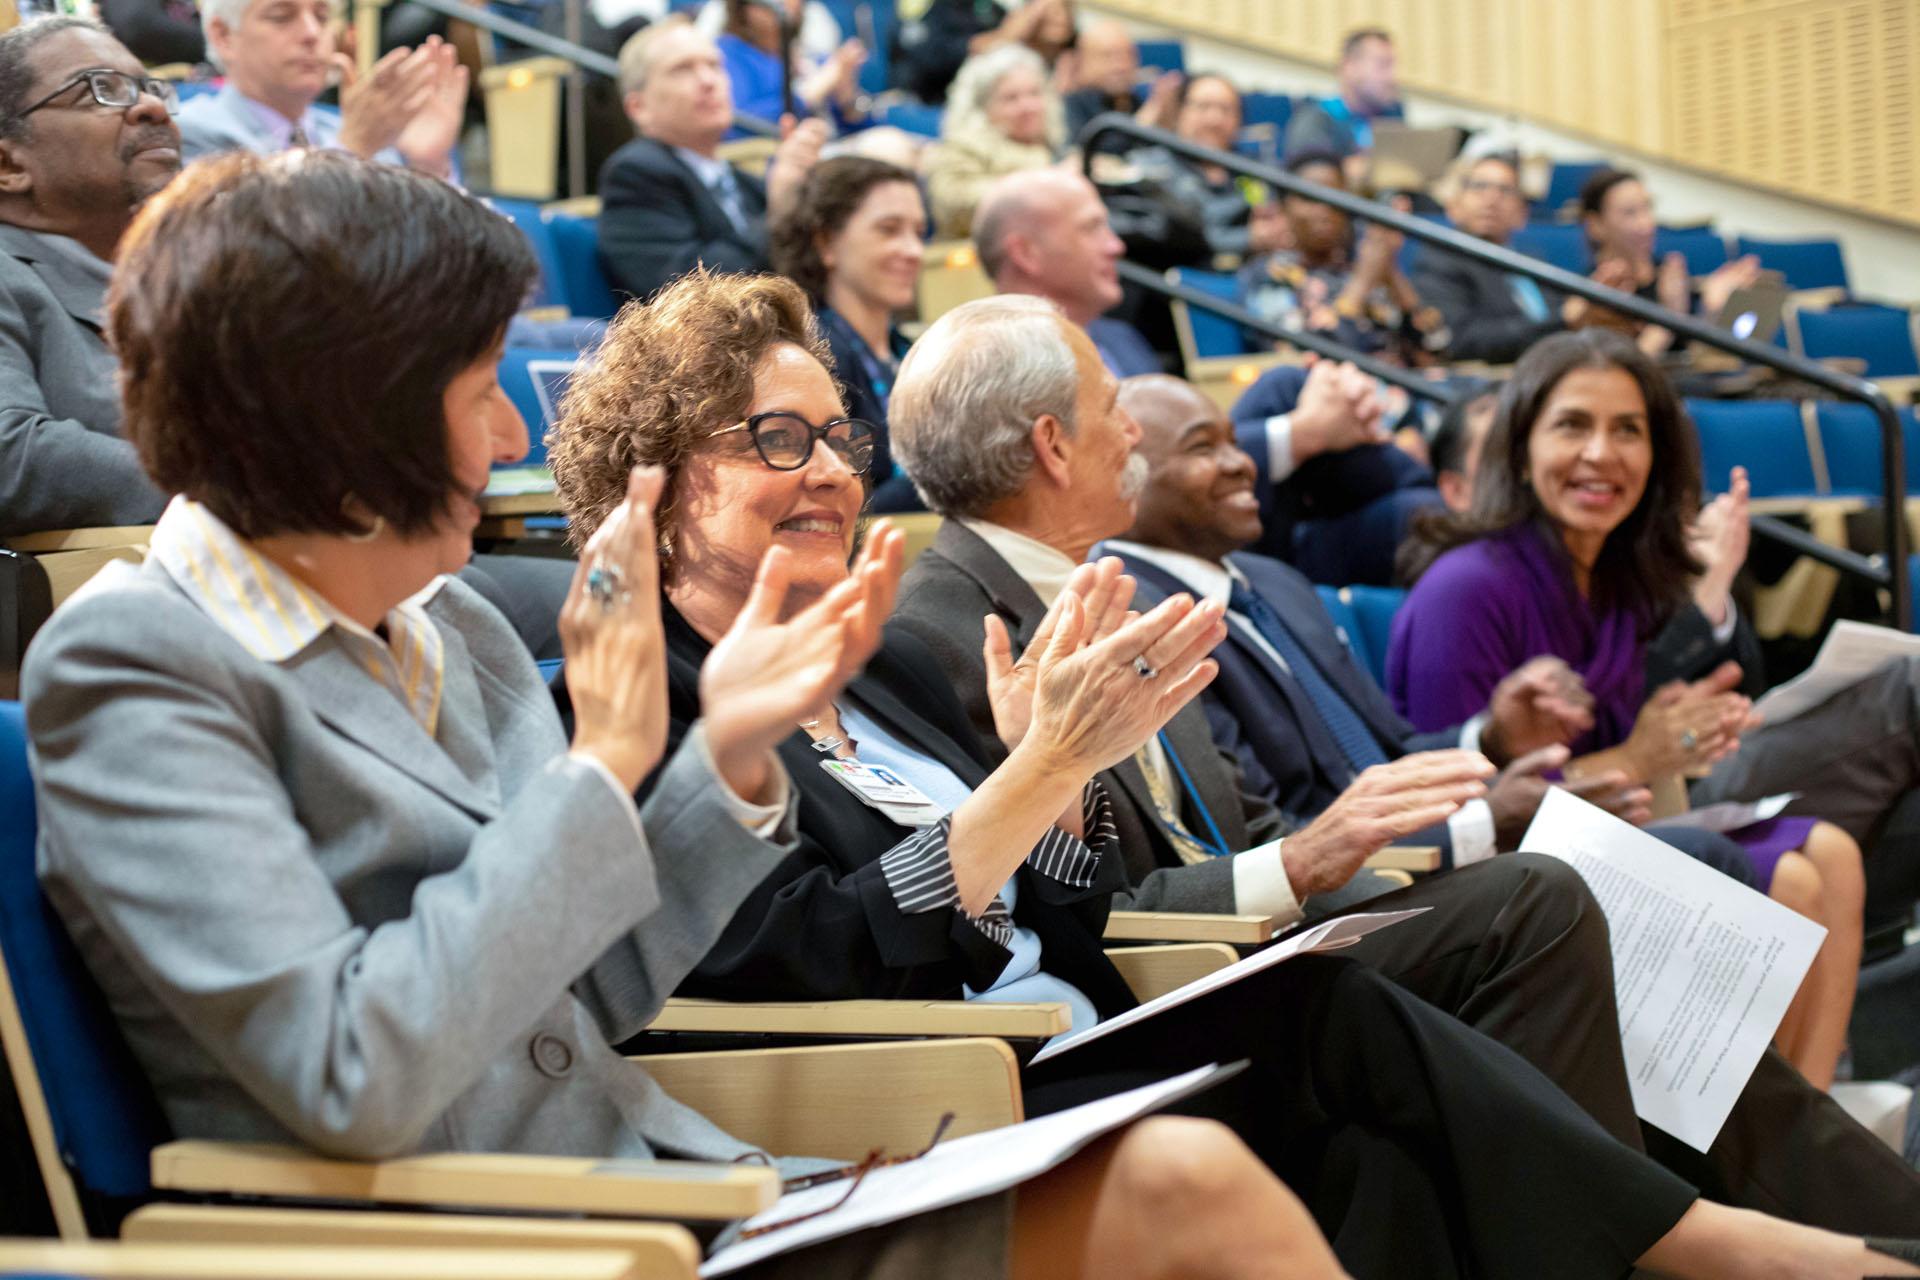 Seated attendees of the 2019 UCSF Diversity Leadership Forum applaud.